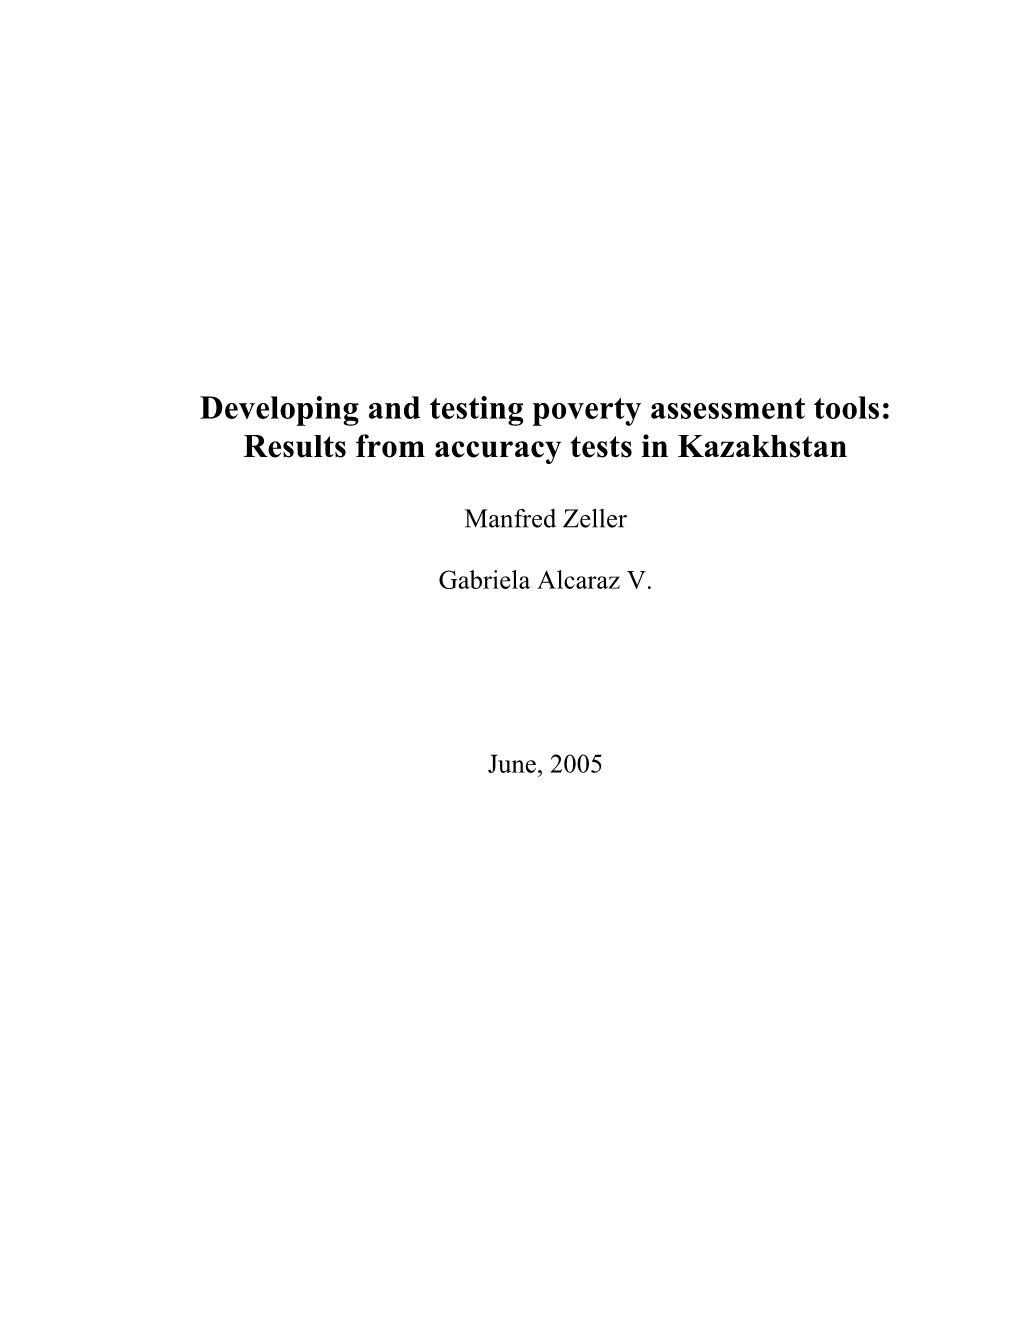 Developing and Testing Poverty Assessment Tools: Results from Accuracy Tests in Kazakhstan